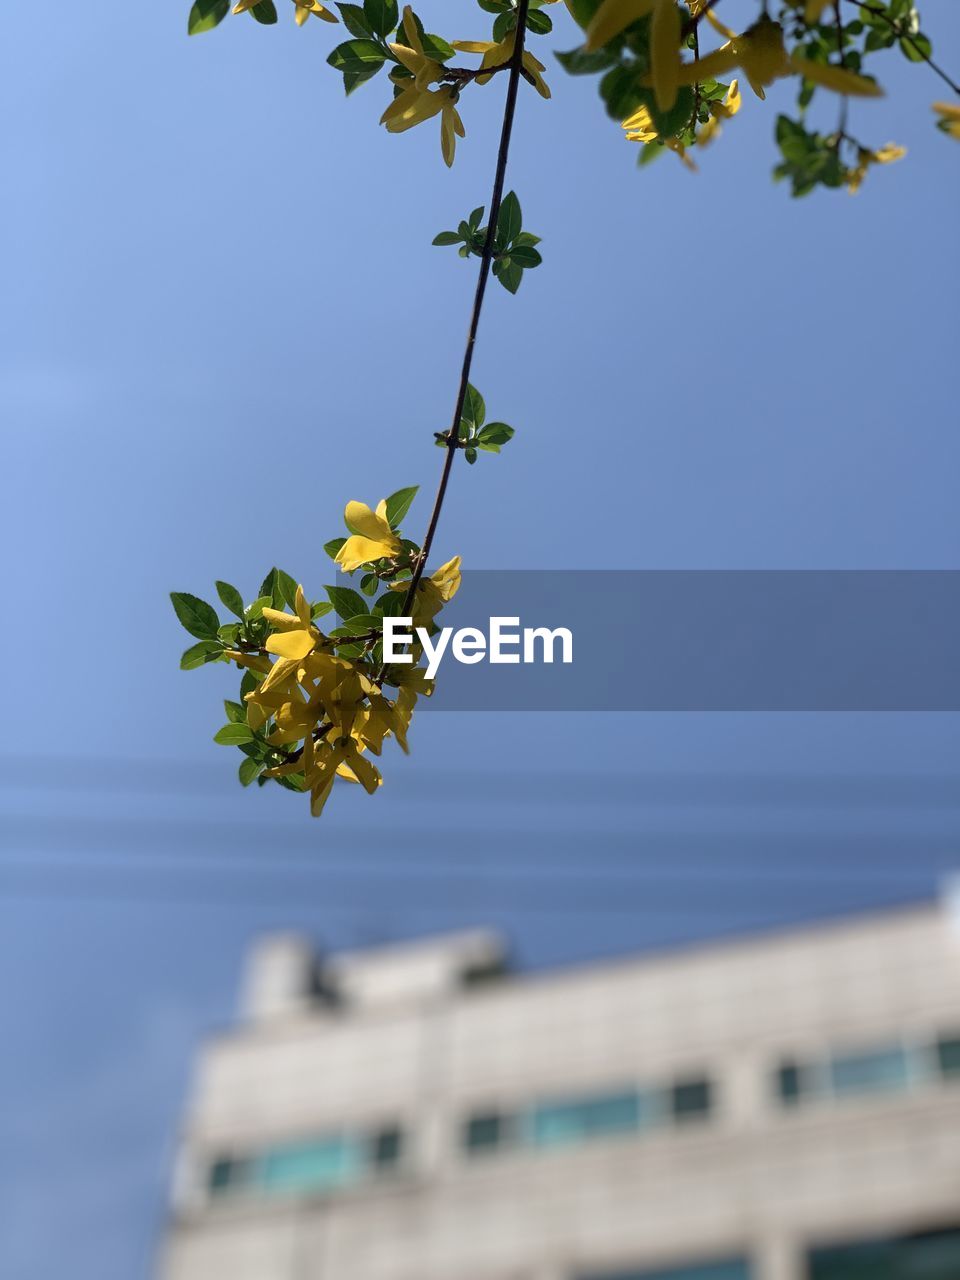 plant, nature, leaf, tree, sky, plant part, flower, yellow, branch, architecture, no people, growth, blue, day, outdoors, building exterior, built structure, clear sky, beauty in nature, city, fruit, focus on foreground, green, sunlight, building, blossom, close-up, freshness, low angle view, sunny, flowering plant